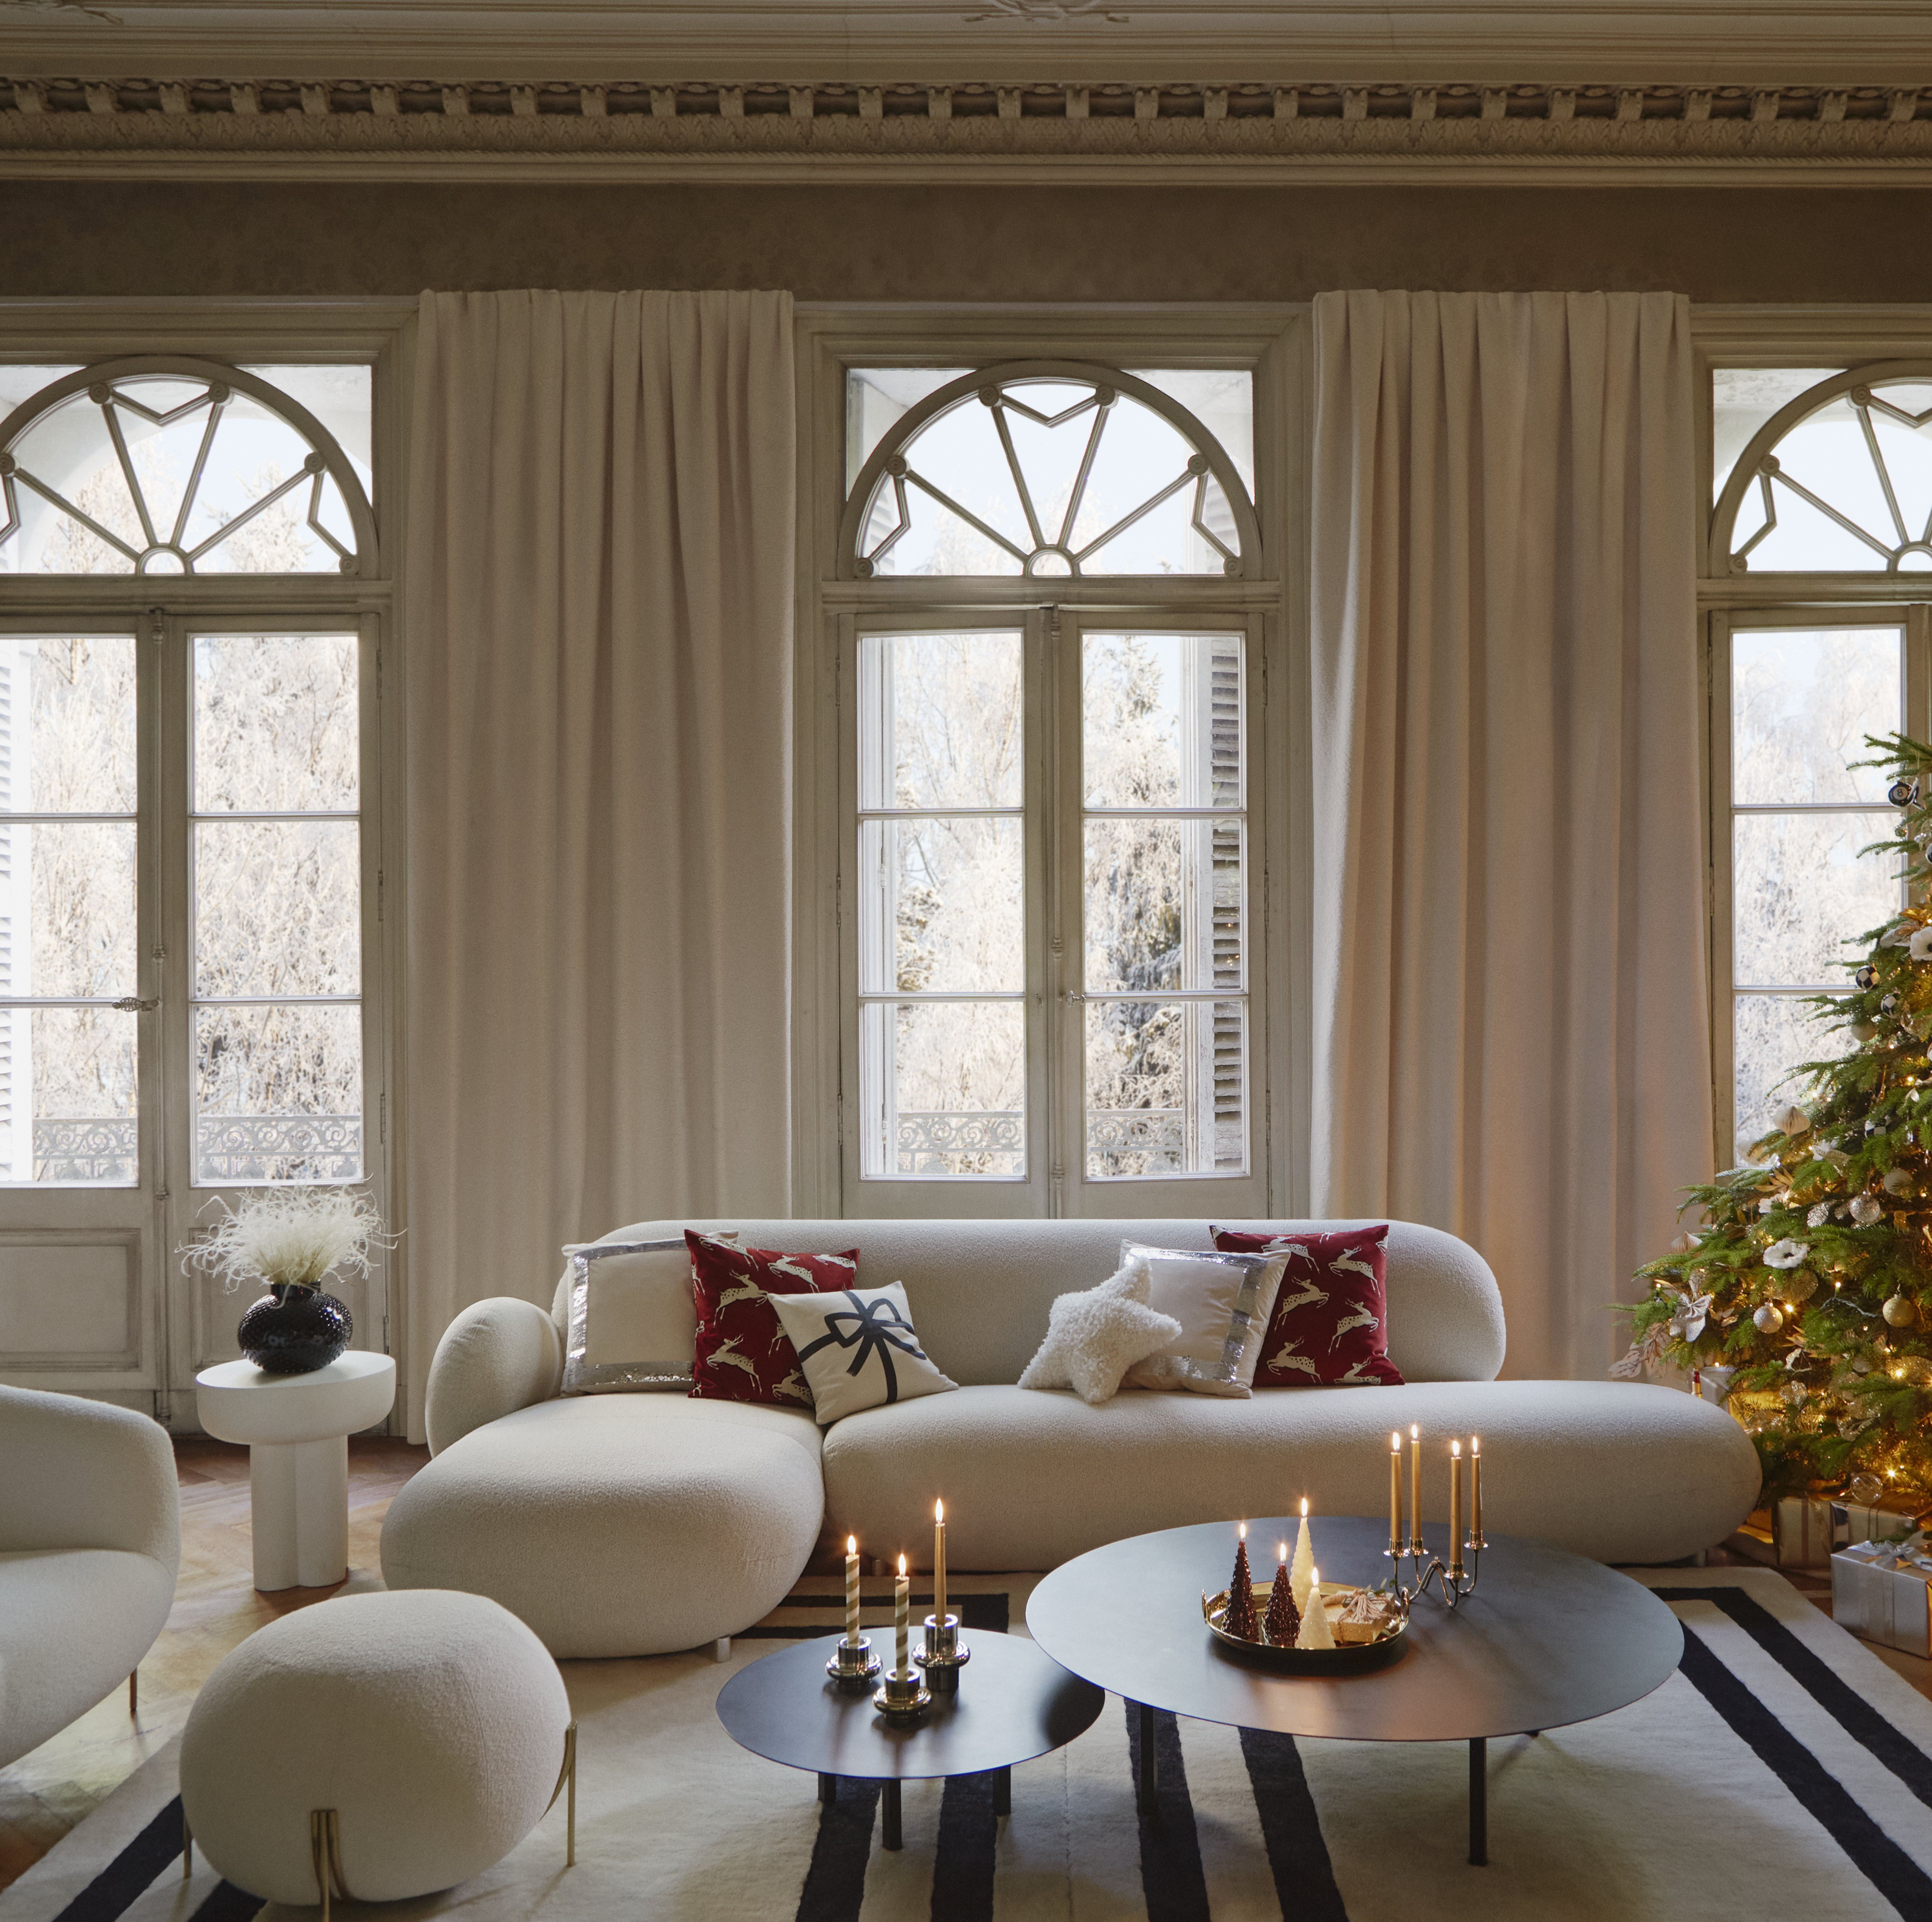 H&M Home Just Dropped a Holiday Decor Collection, and OMG...It's So Chic and Affordable!?